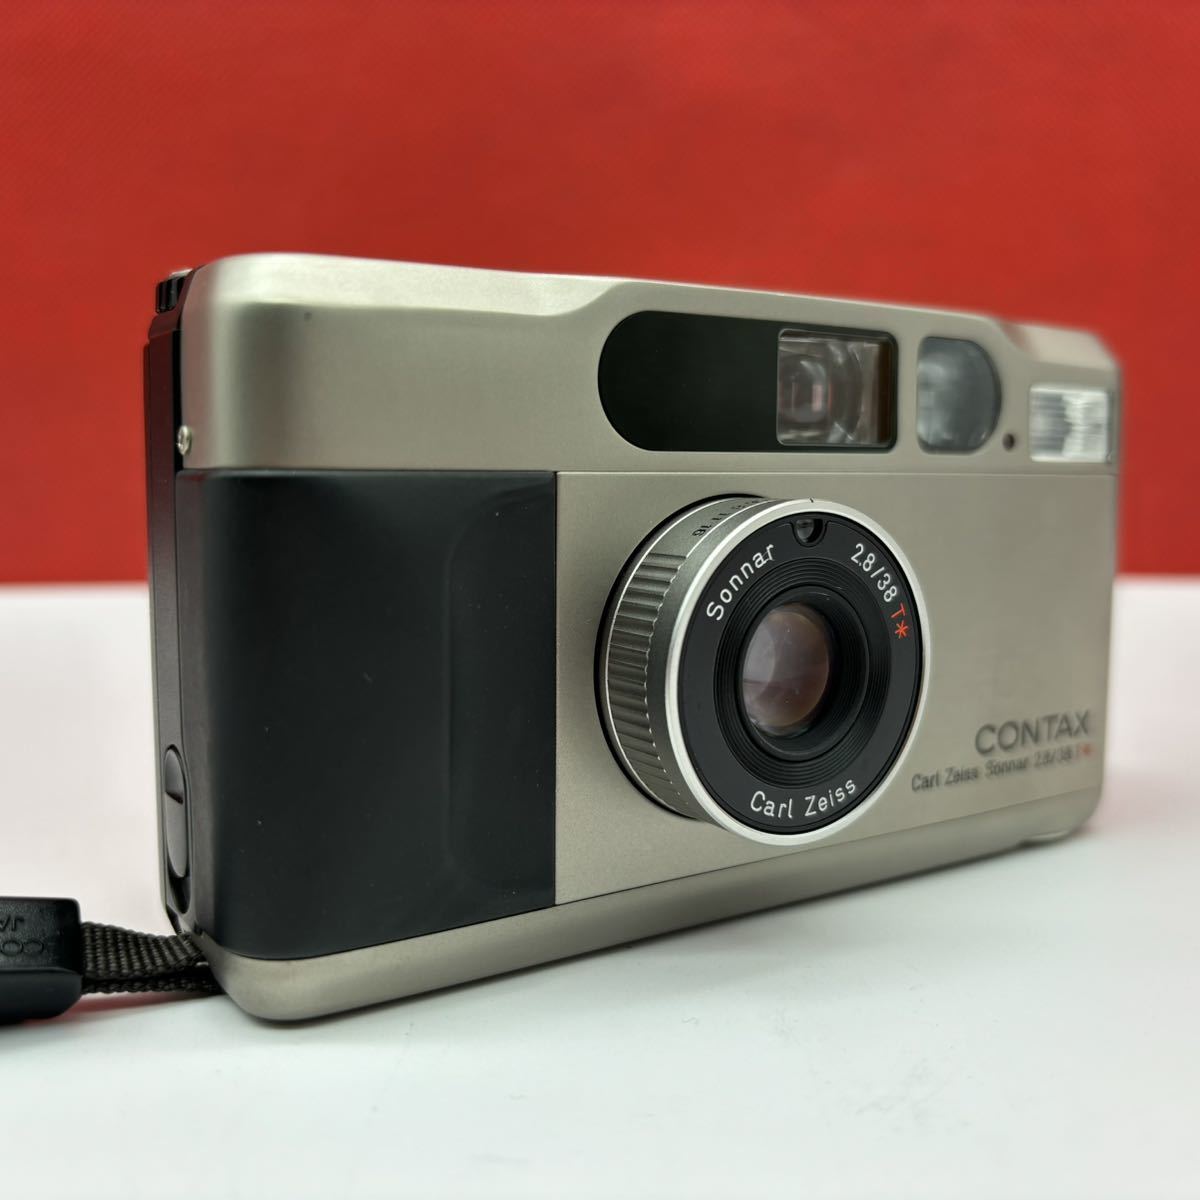 ◆ CONTAX T2 コンパクトフィルムカメラ Carl Zeiss Sonnar 2.8/38 T* シャッター、フラッシュOK 箱付き コンタックス_画像4